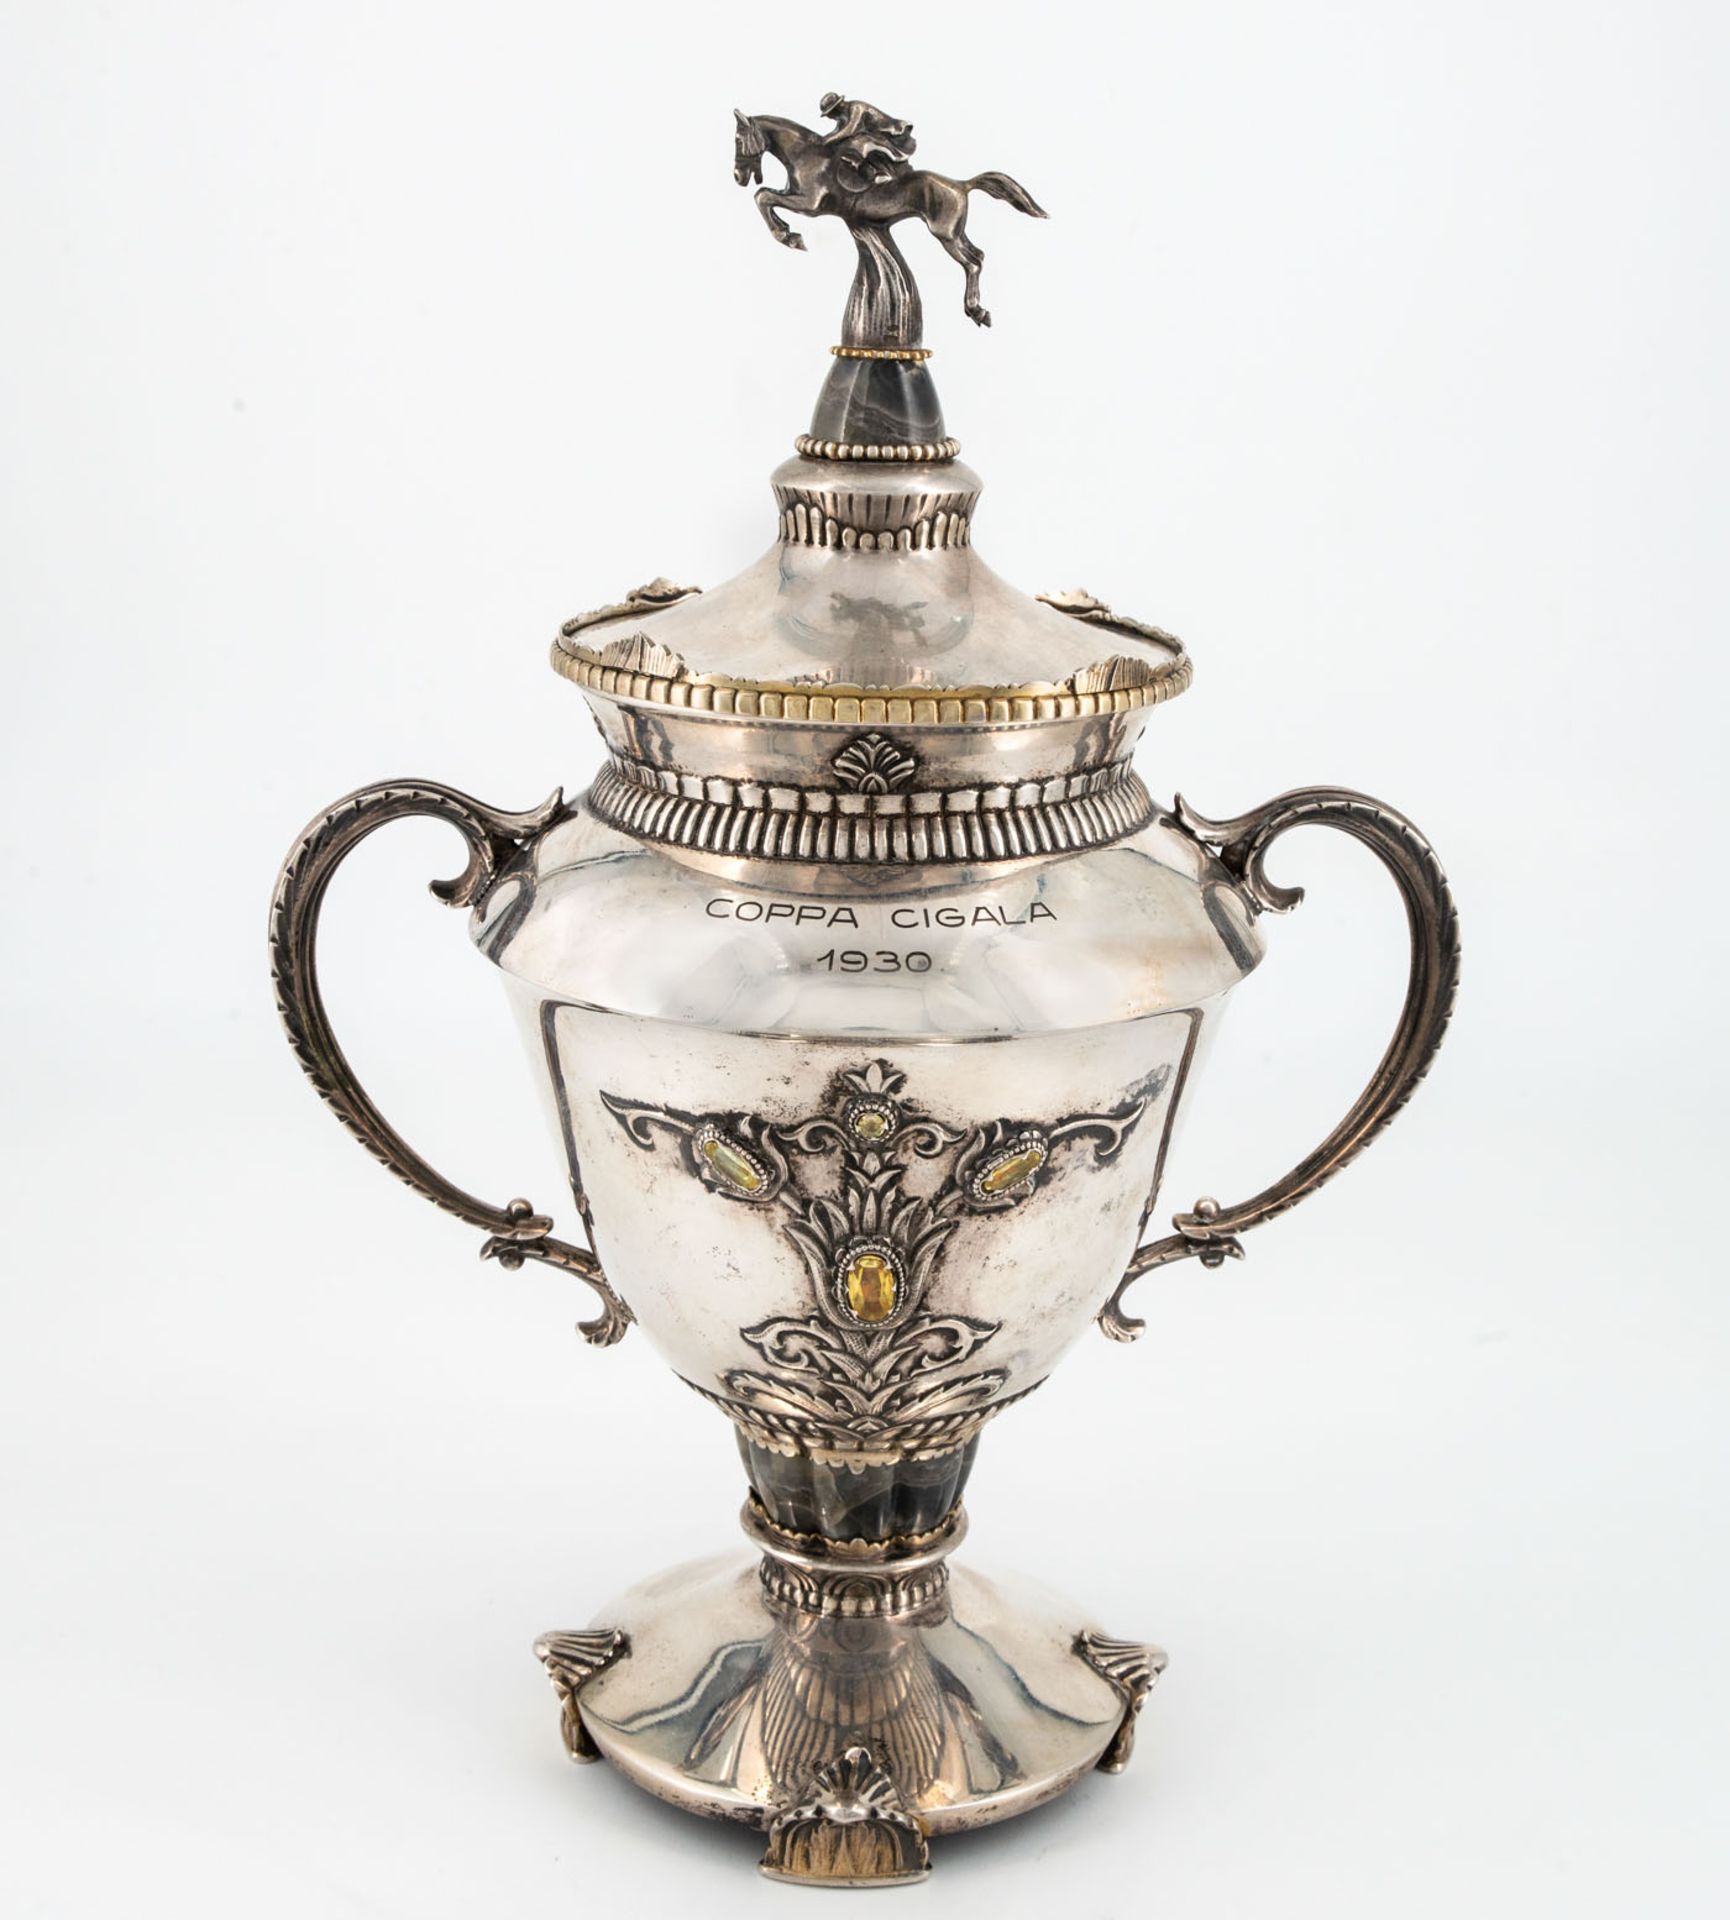 A Fine Silver and Parcel Gilt Presentation Goblet, Austro-Hungary, Early 20th Century - Image 2 of 7